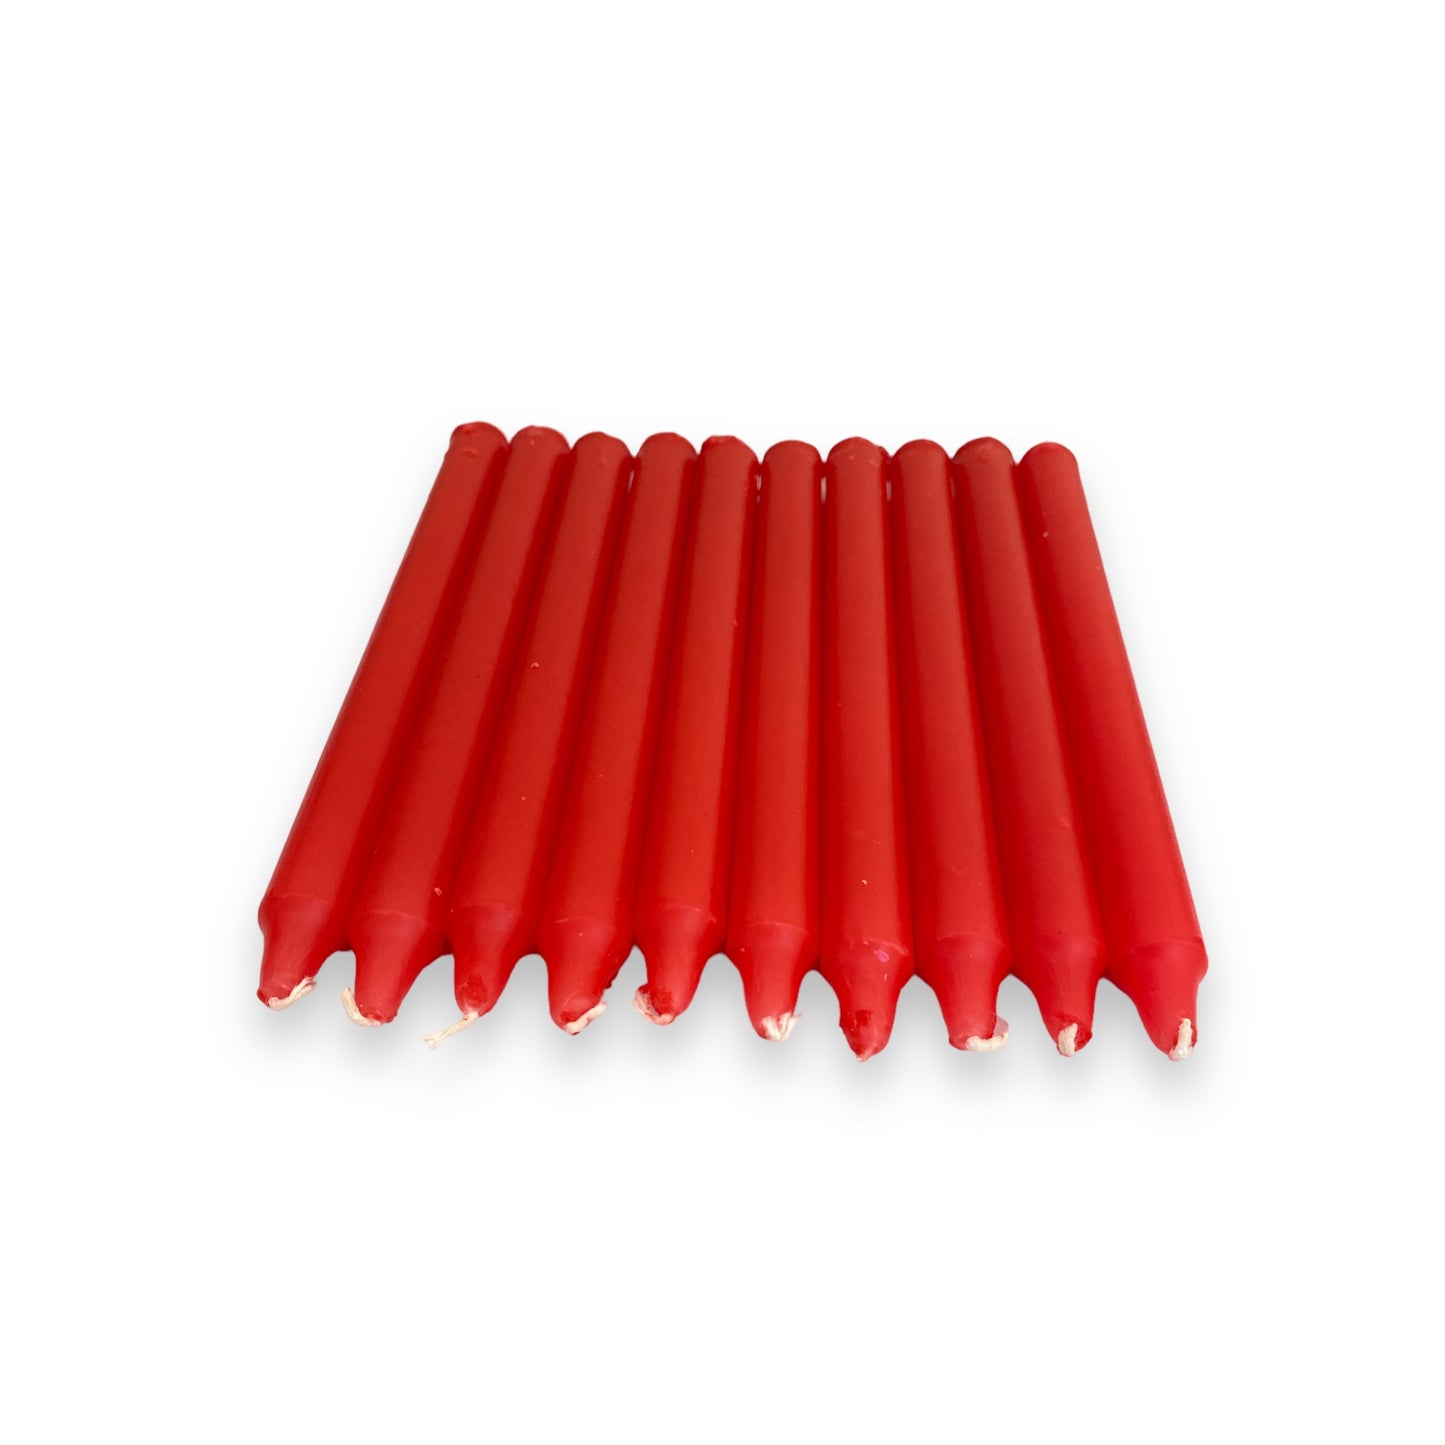 Pack of Red Candles - 17cm